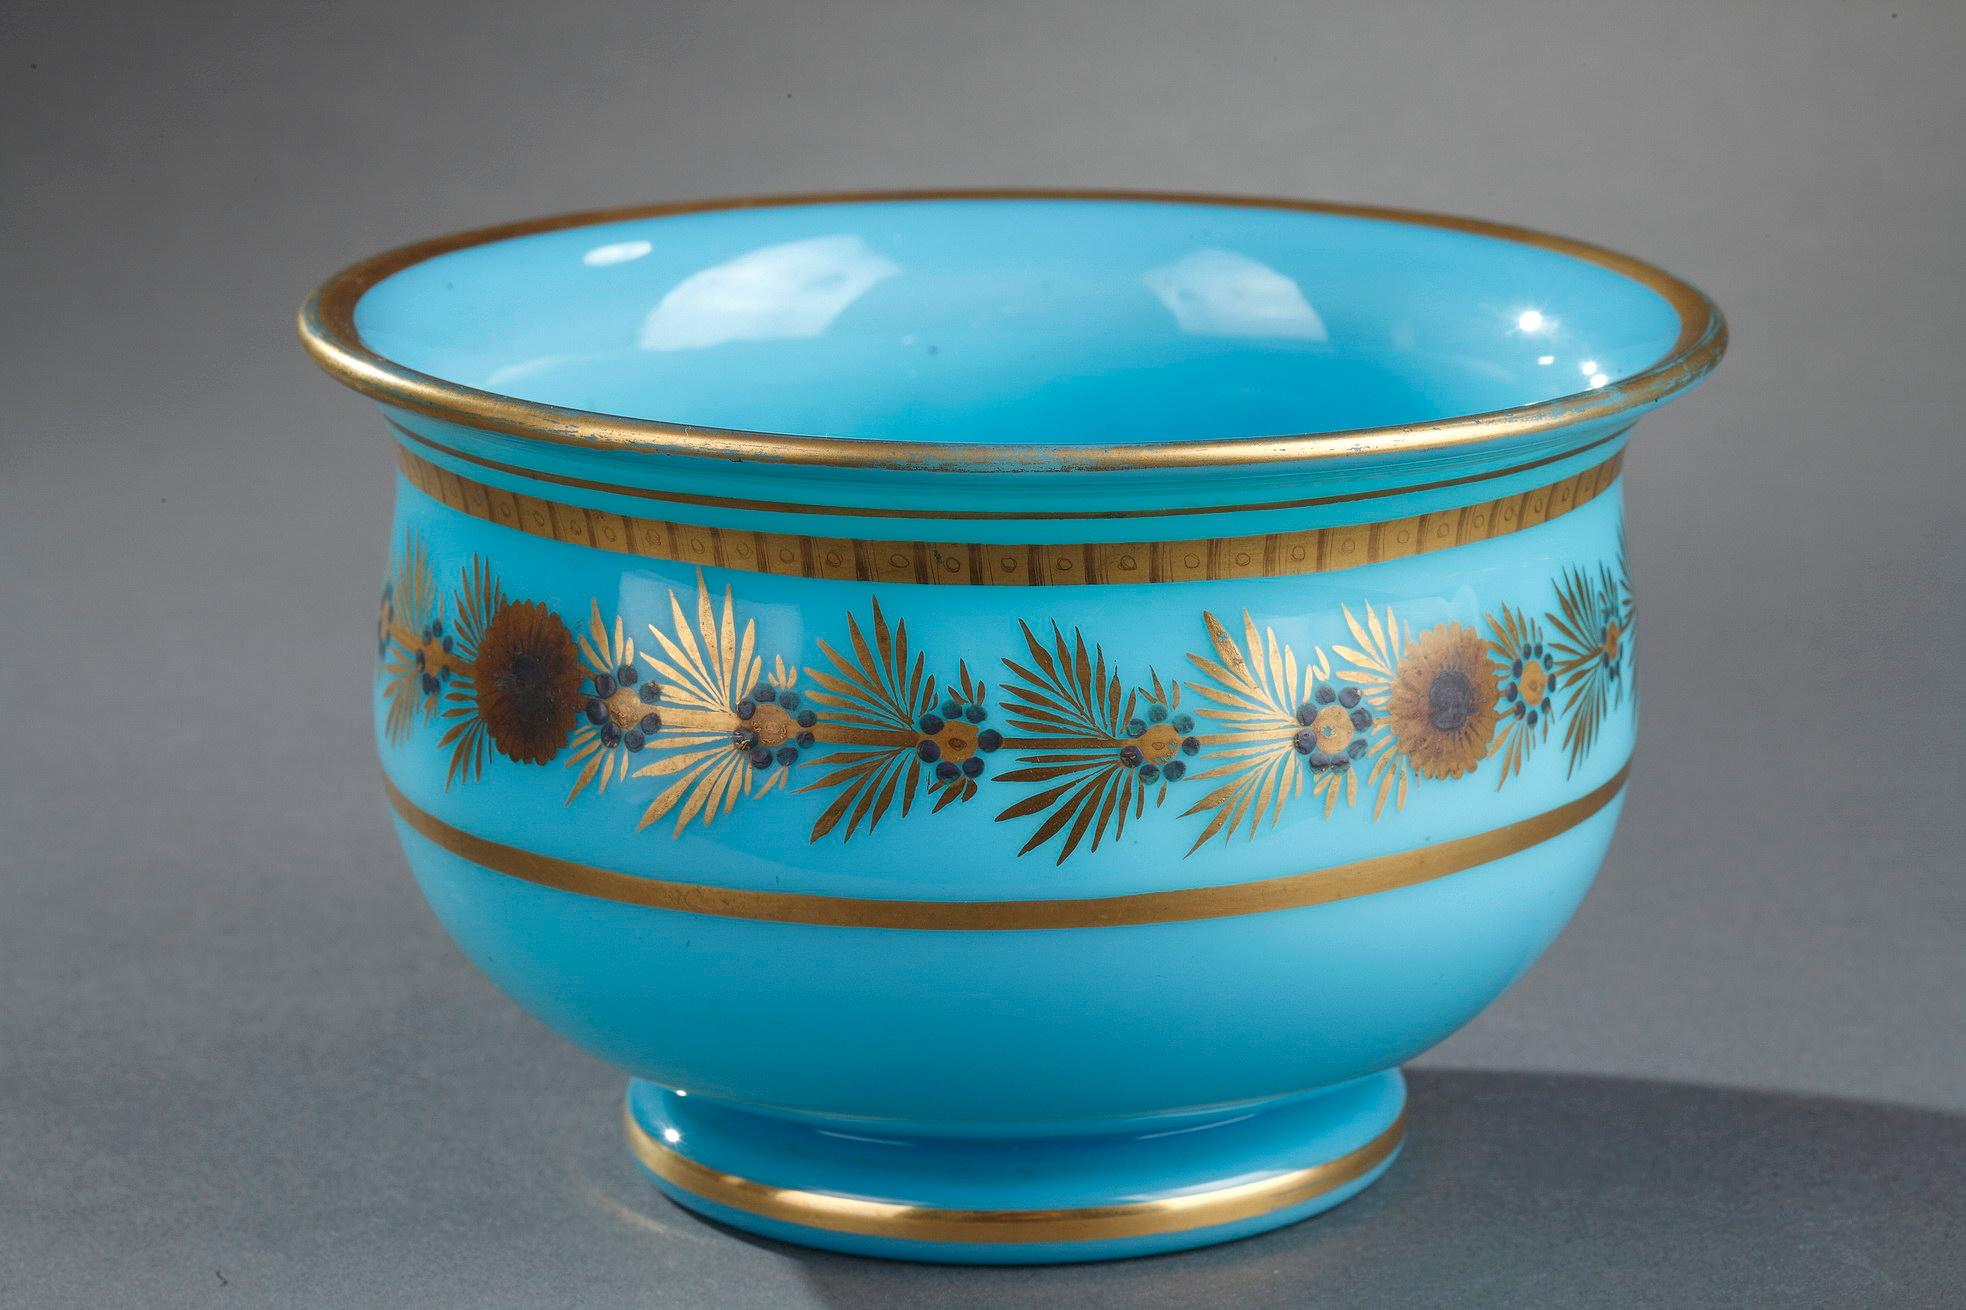 Charles X Pair of Early 19th Century Blue Opaline Bowls by Desvignes For Sale